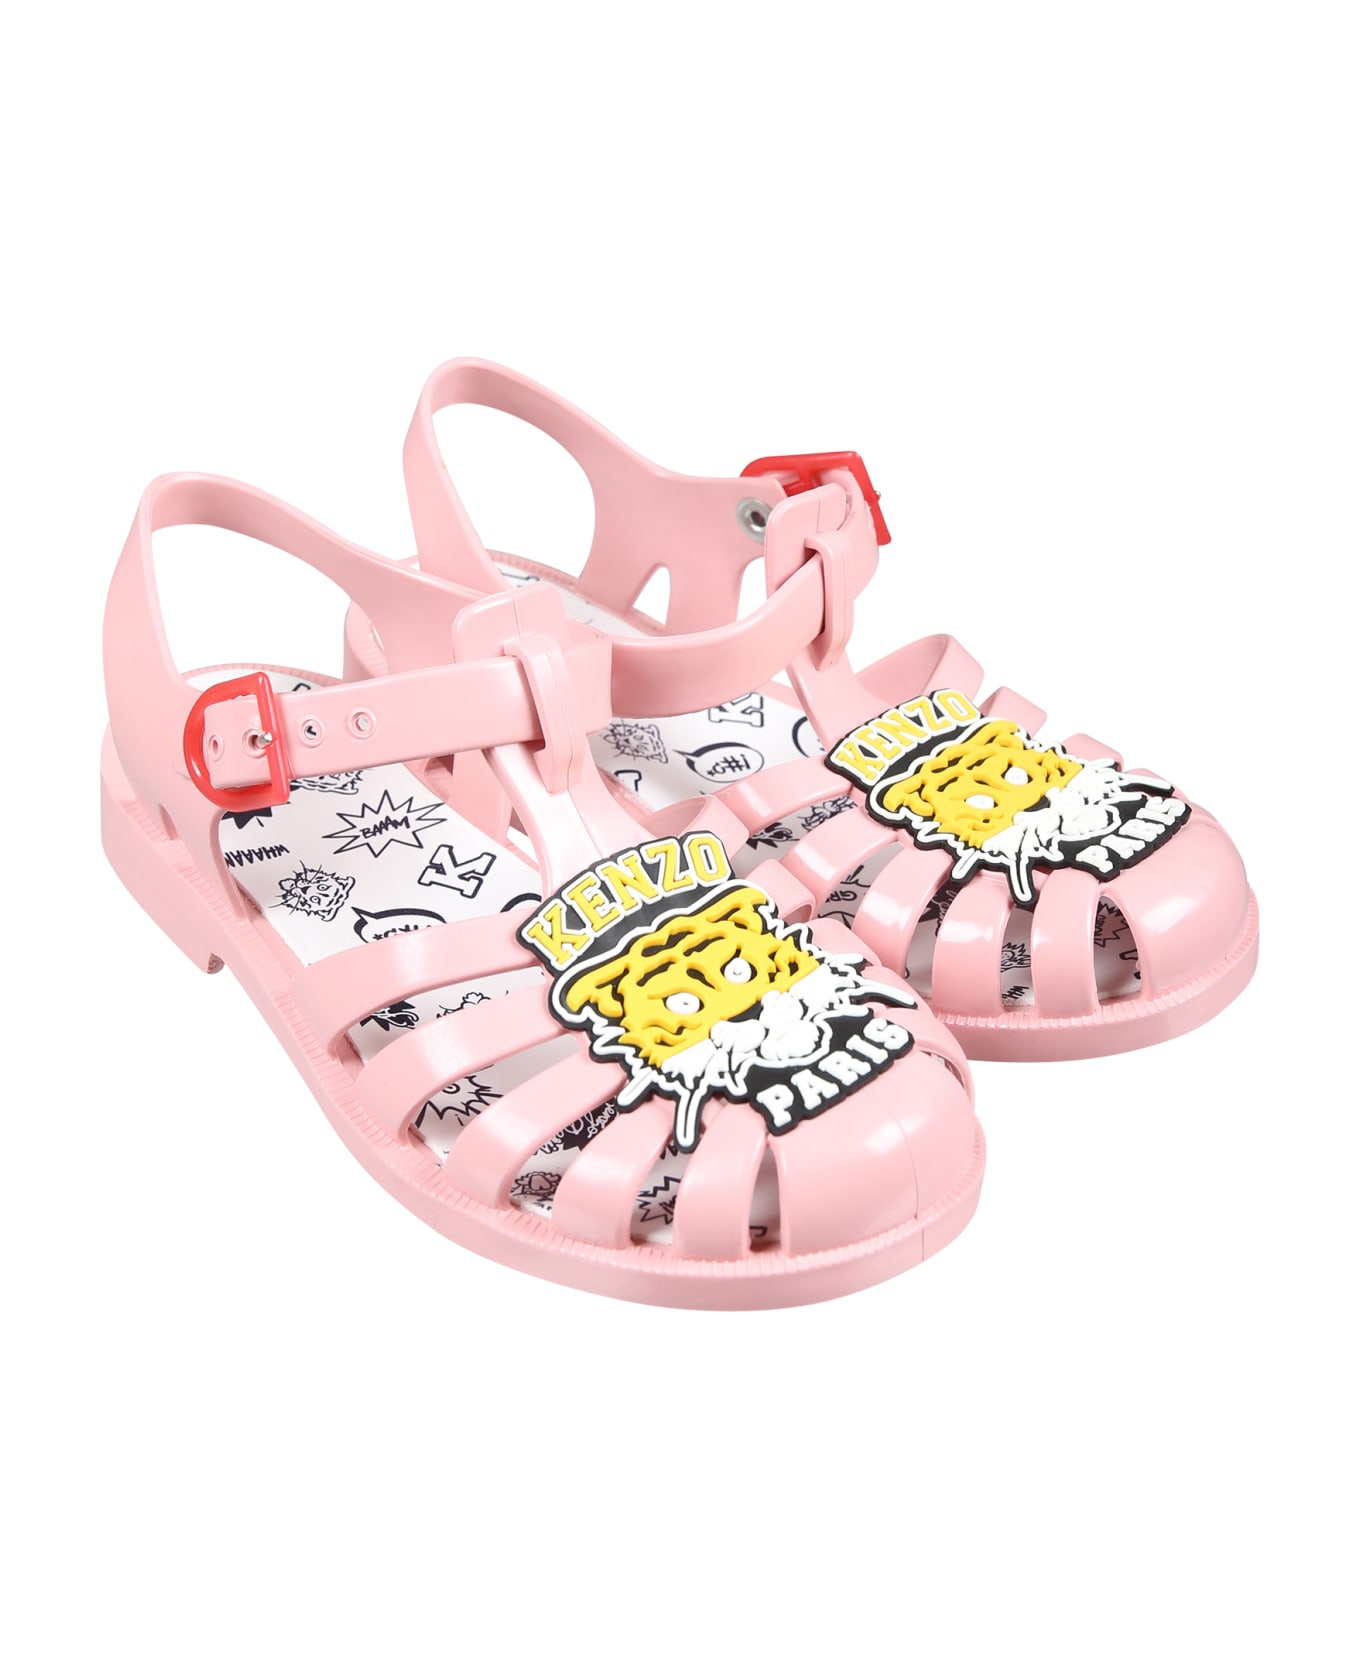 Kenzo Kids Pink Sandals For Girl With Tiger - Pink